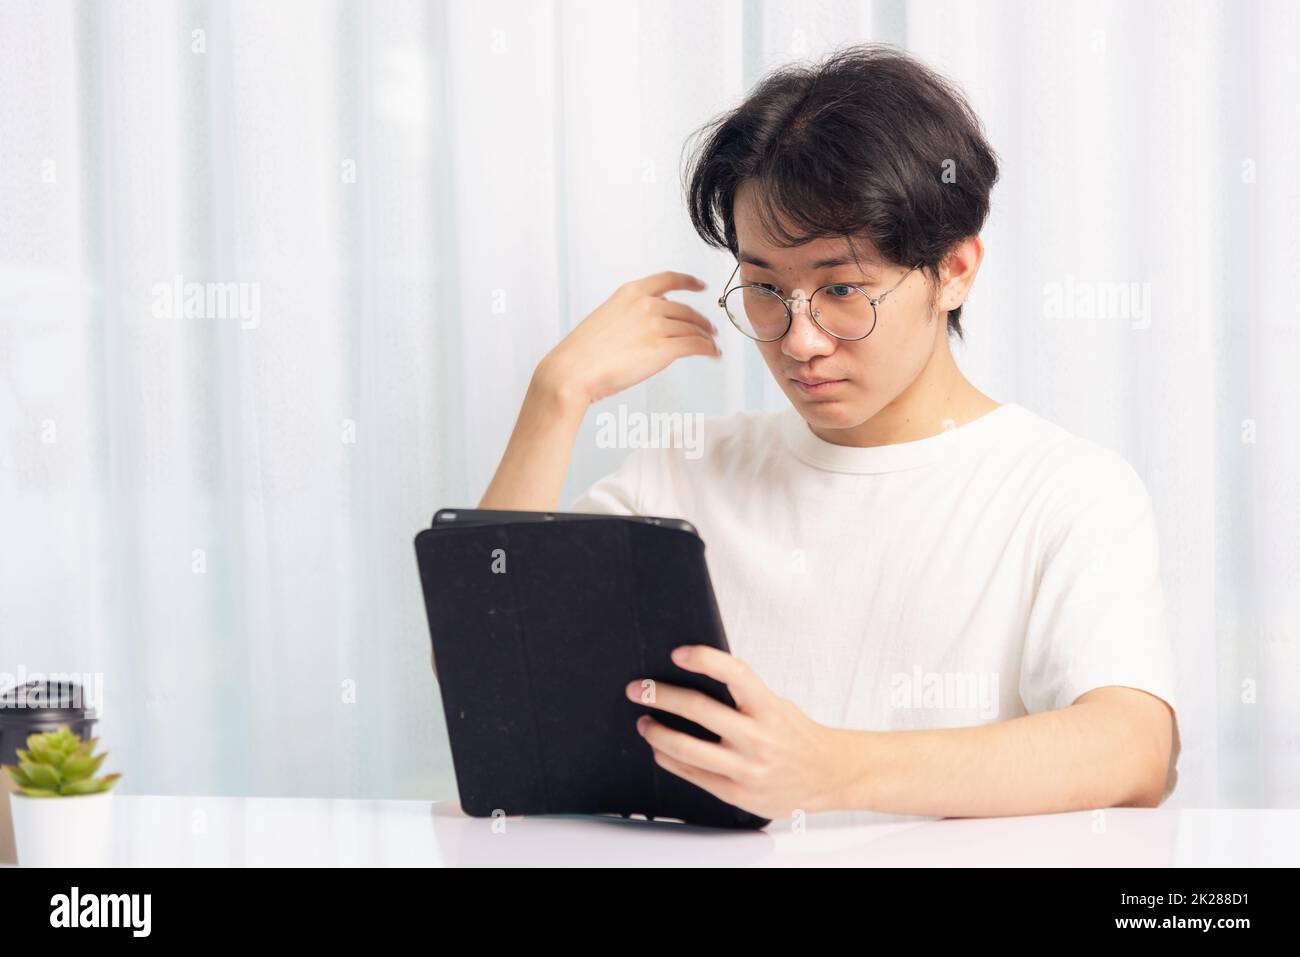 Business man work from home office he using a black modern smart digital tablet computer Stock Photo